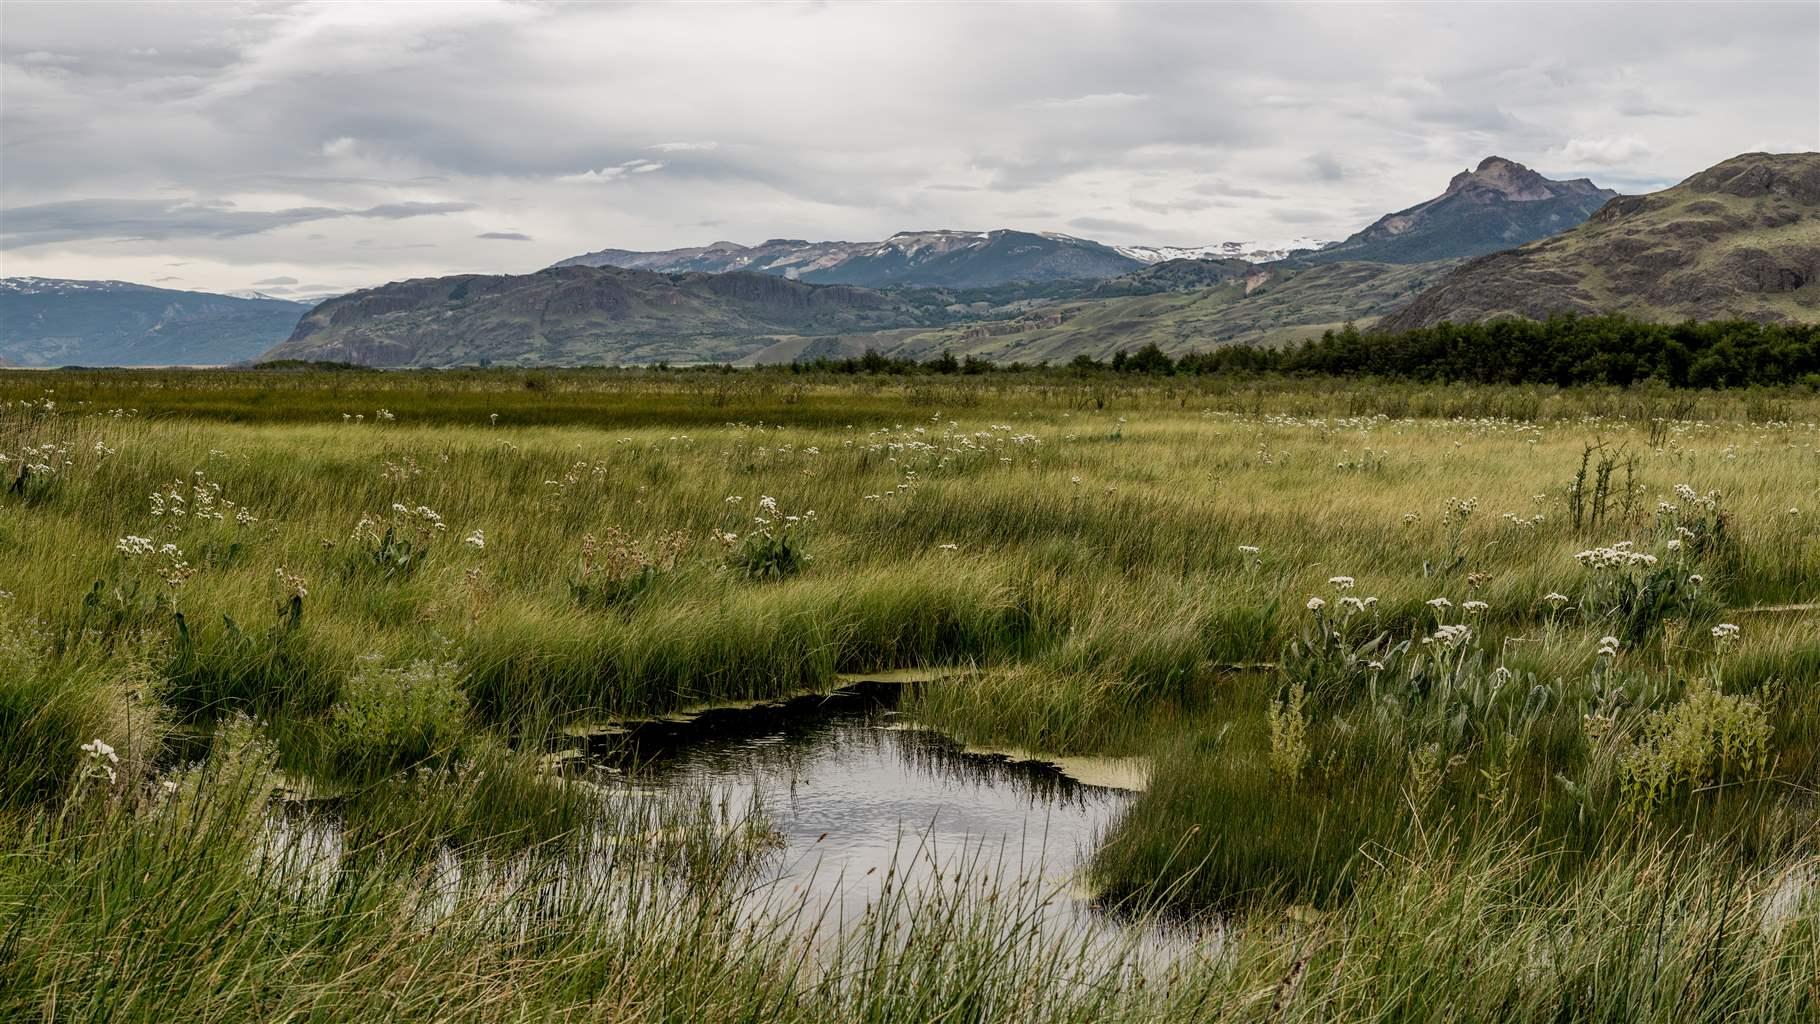 Tall green grasses grow from wetlands surrounded by rocky hills, whose highest peaks are dotted with patches of snow.